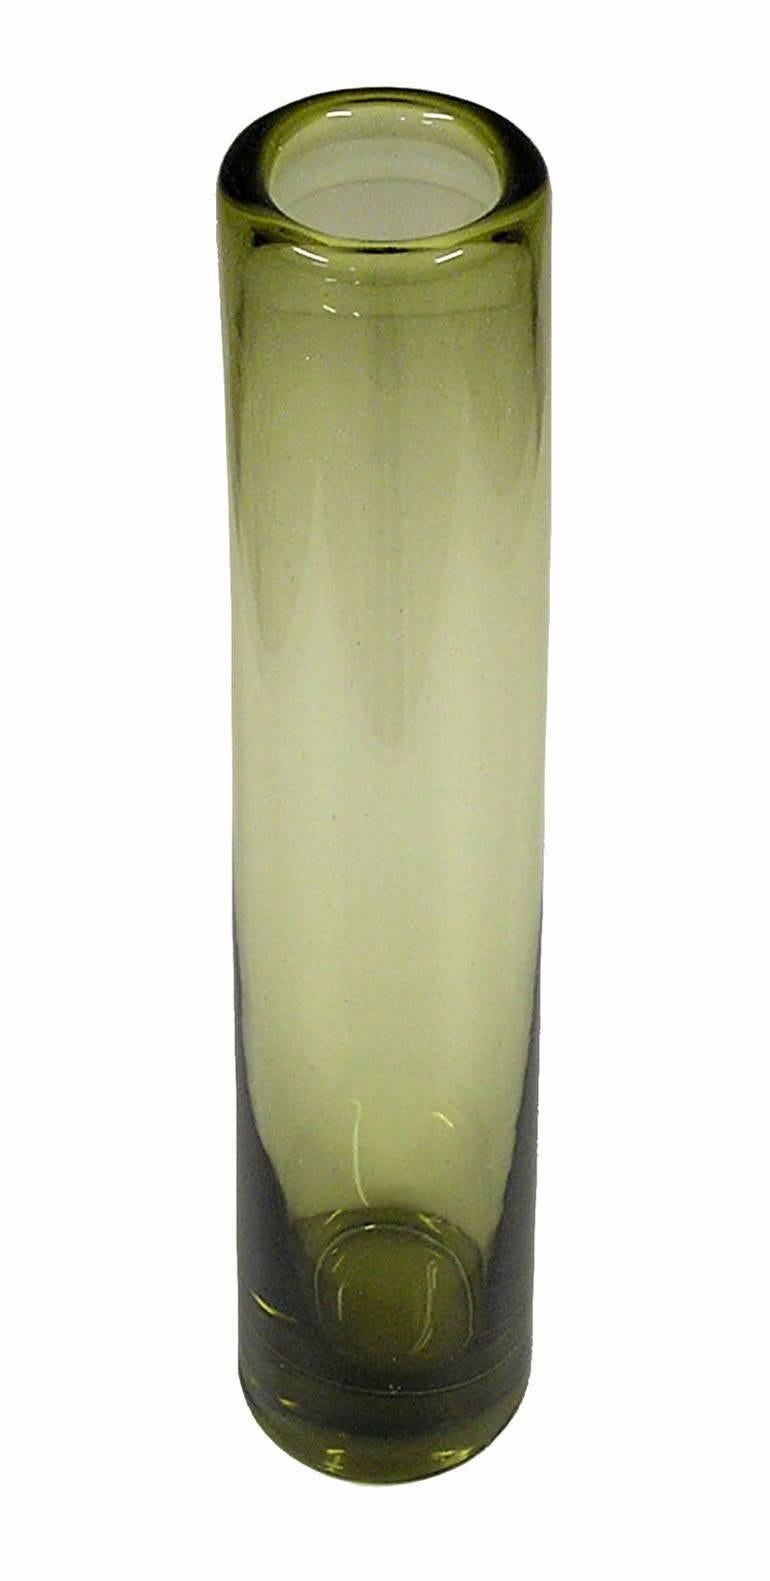 A gorgeous cylindrical art glass bud vase from 1962 by Per Lutkin for Holmegaard of Denmark. Considered one of the premier glass makers of the Scandinavian Modern era Per was responsible for introducing the use of lovely soft colors and free flowing